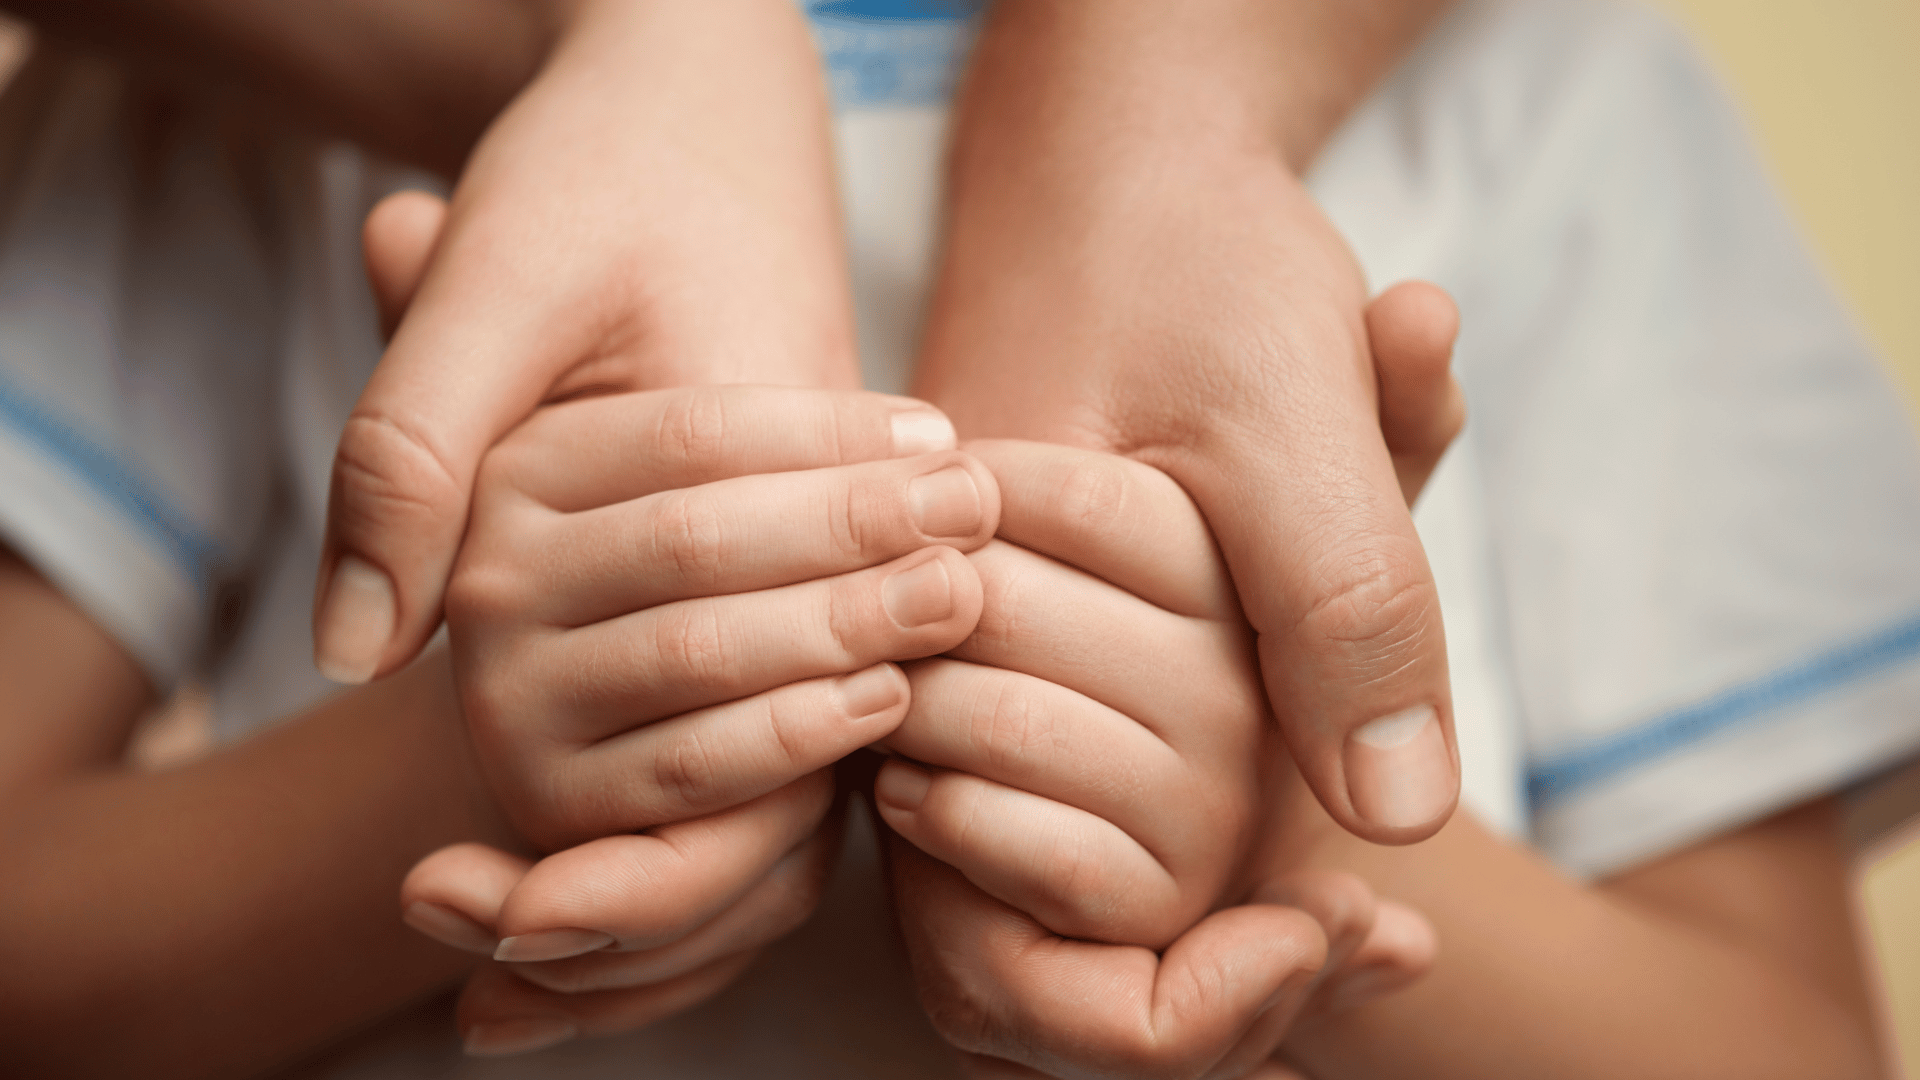 Childs hands enclosed in older person's hands. Children's Court: Care Protection Lawyers. Child Protection Lawyers Sydney. Domestic Violence Lawyers Sydney.